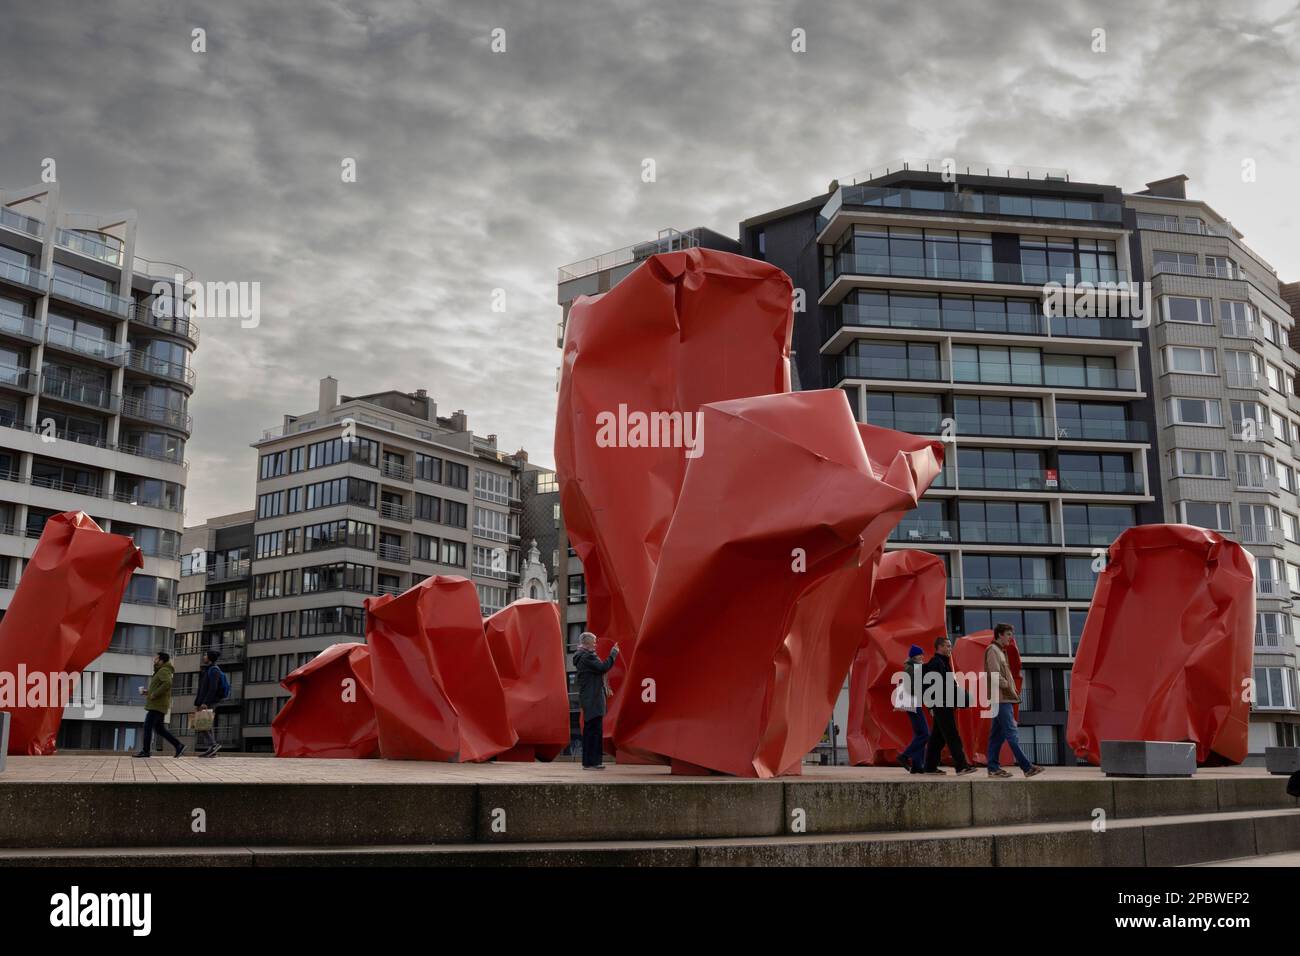 OSTEND, BELGIUM, 3 JANUARY 2023: Public artwork 'Rock Strangers' by Arne Quinze and surrounding buildings on the promenade of Ostend. Ostend is a popu Stock Photo